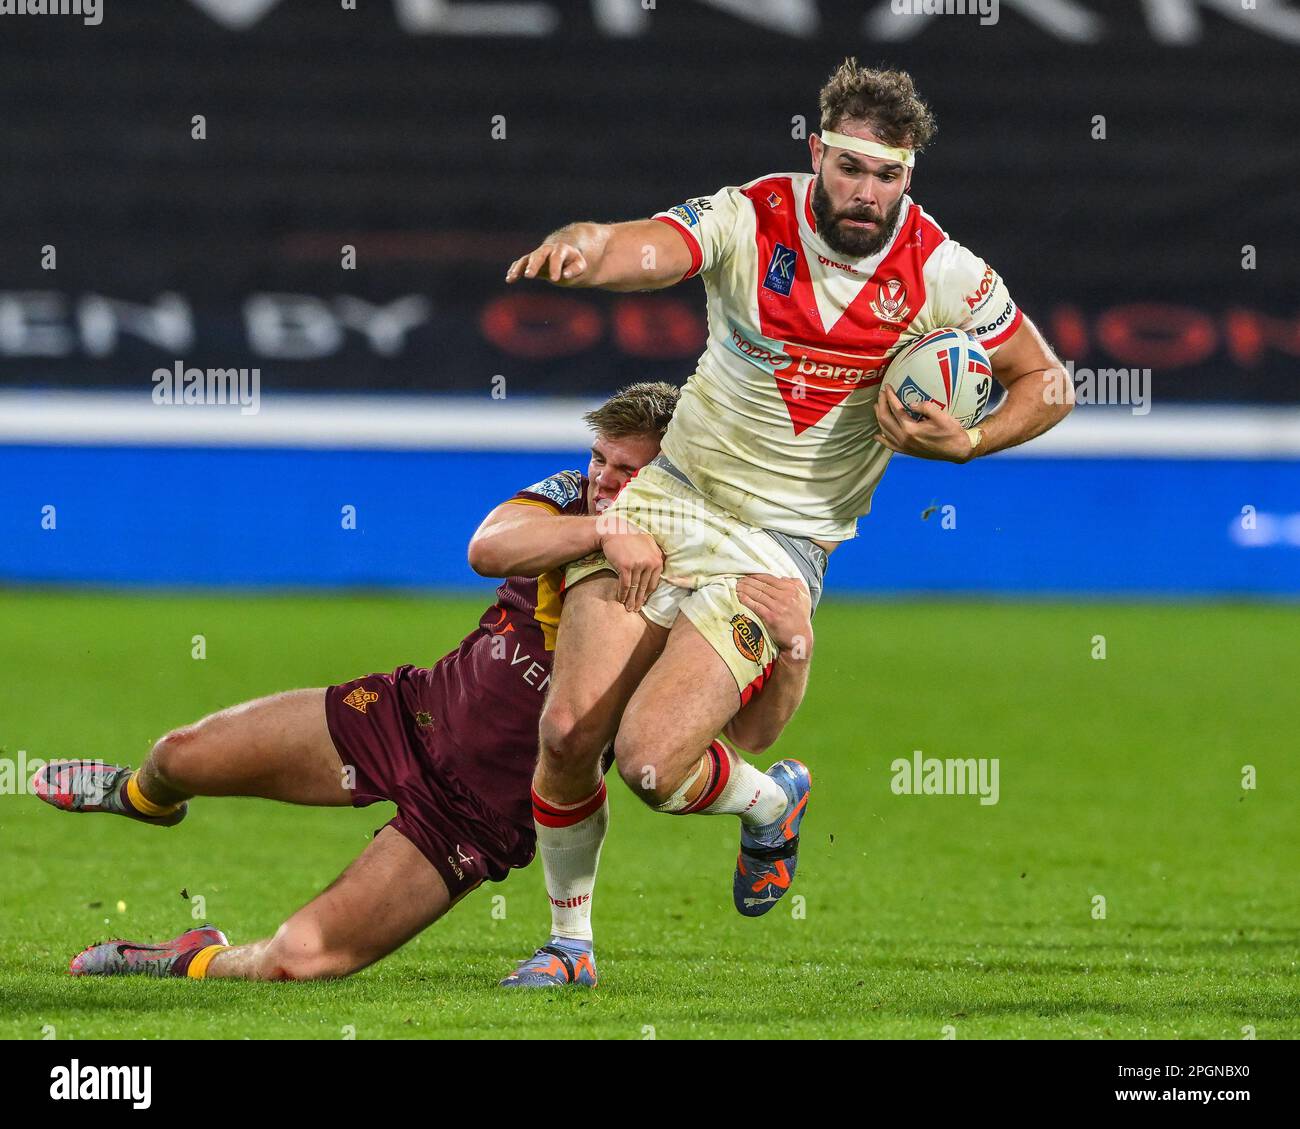 Alex Walmsley #8 of St Helens is tackled by Ashton Golding #14 of Huddersfield Giants  during the Betfred Super League Round 6 match Huddersfield Giants vs St Helens at John Smith's Stadium, Huddersfield, United Kingdom, 23rd March 2023  (Photo by Craig Thomas/News Images) Stock Photo